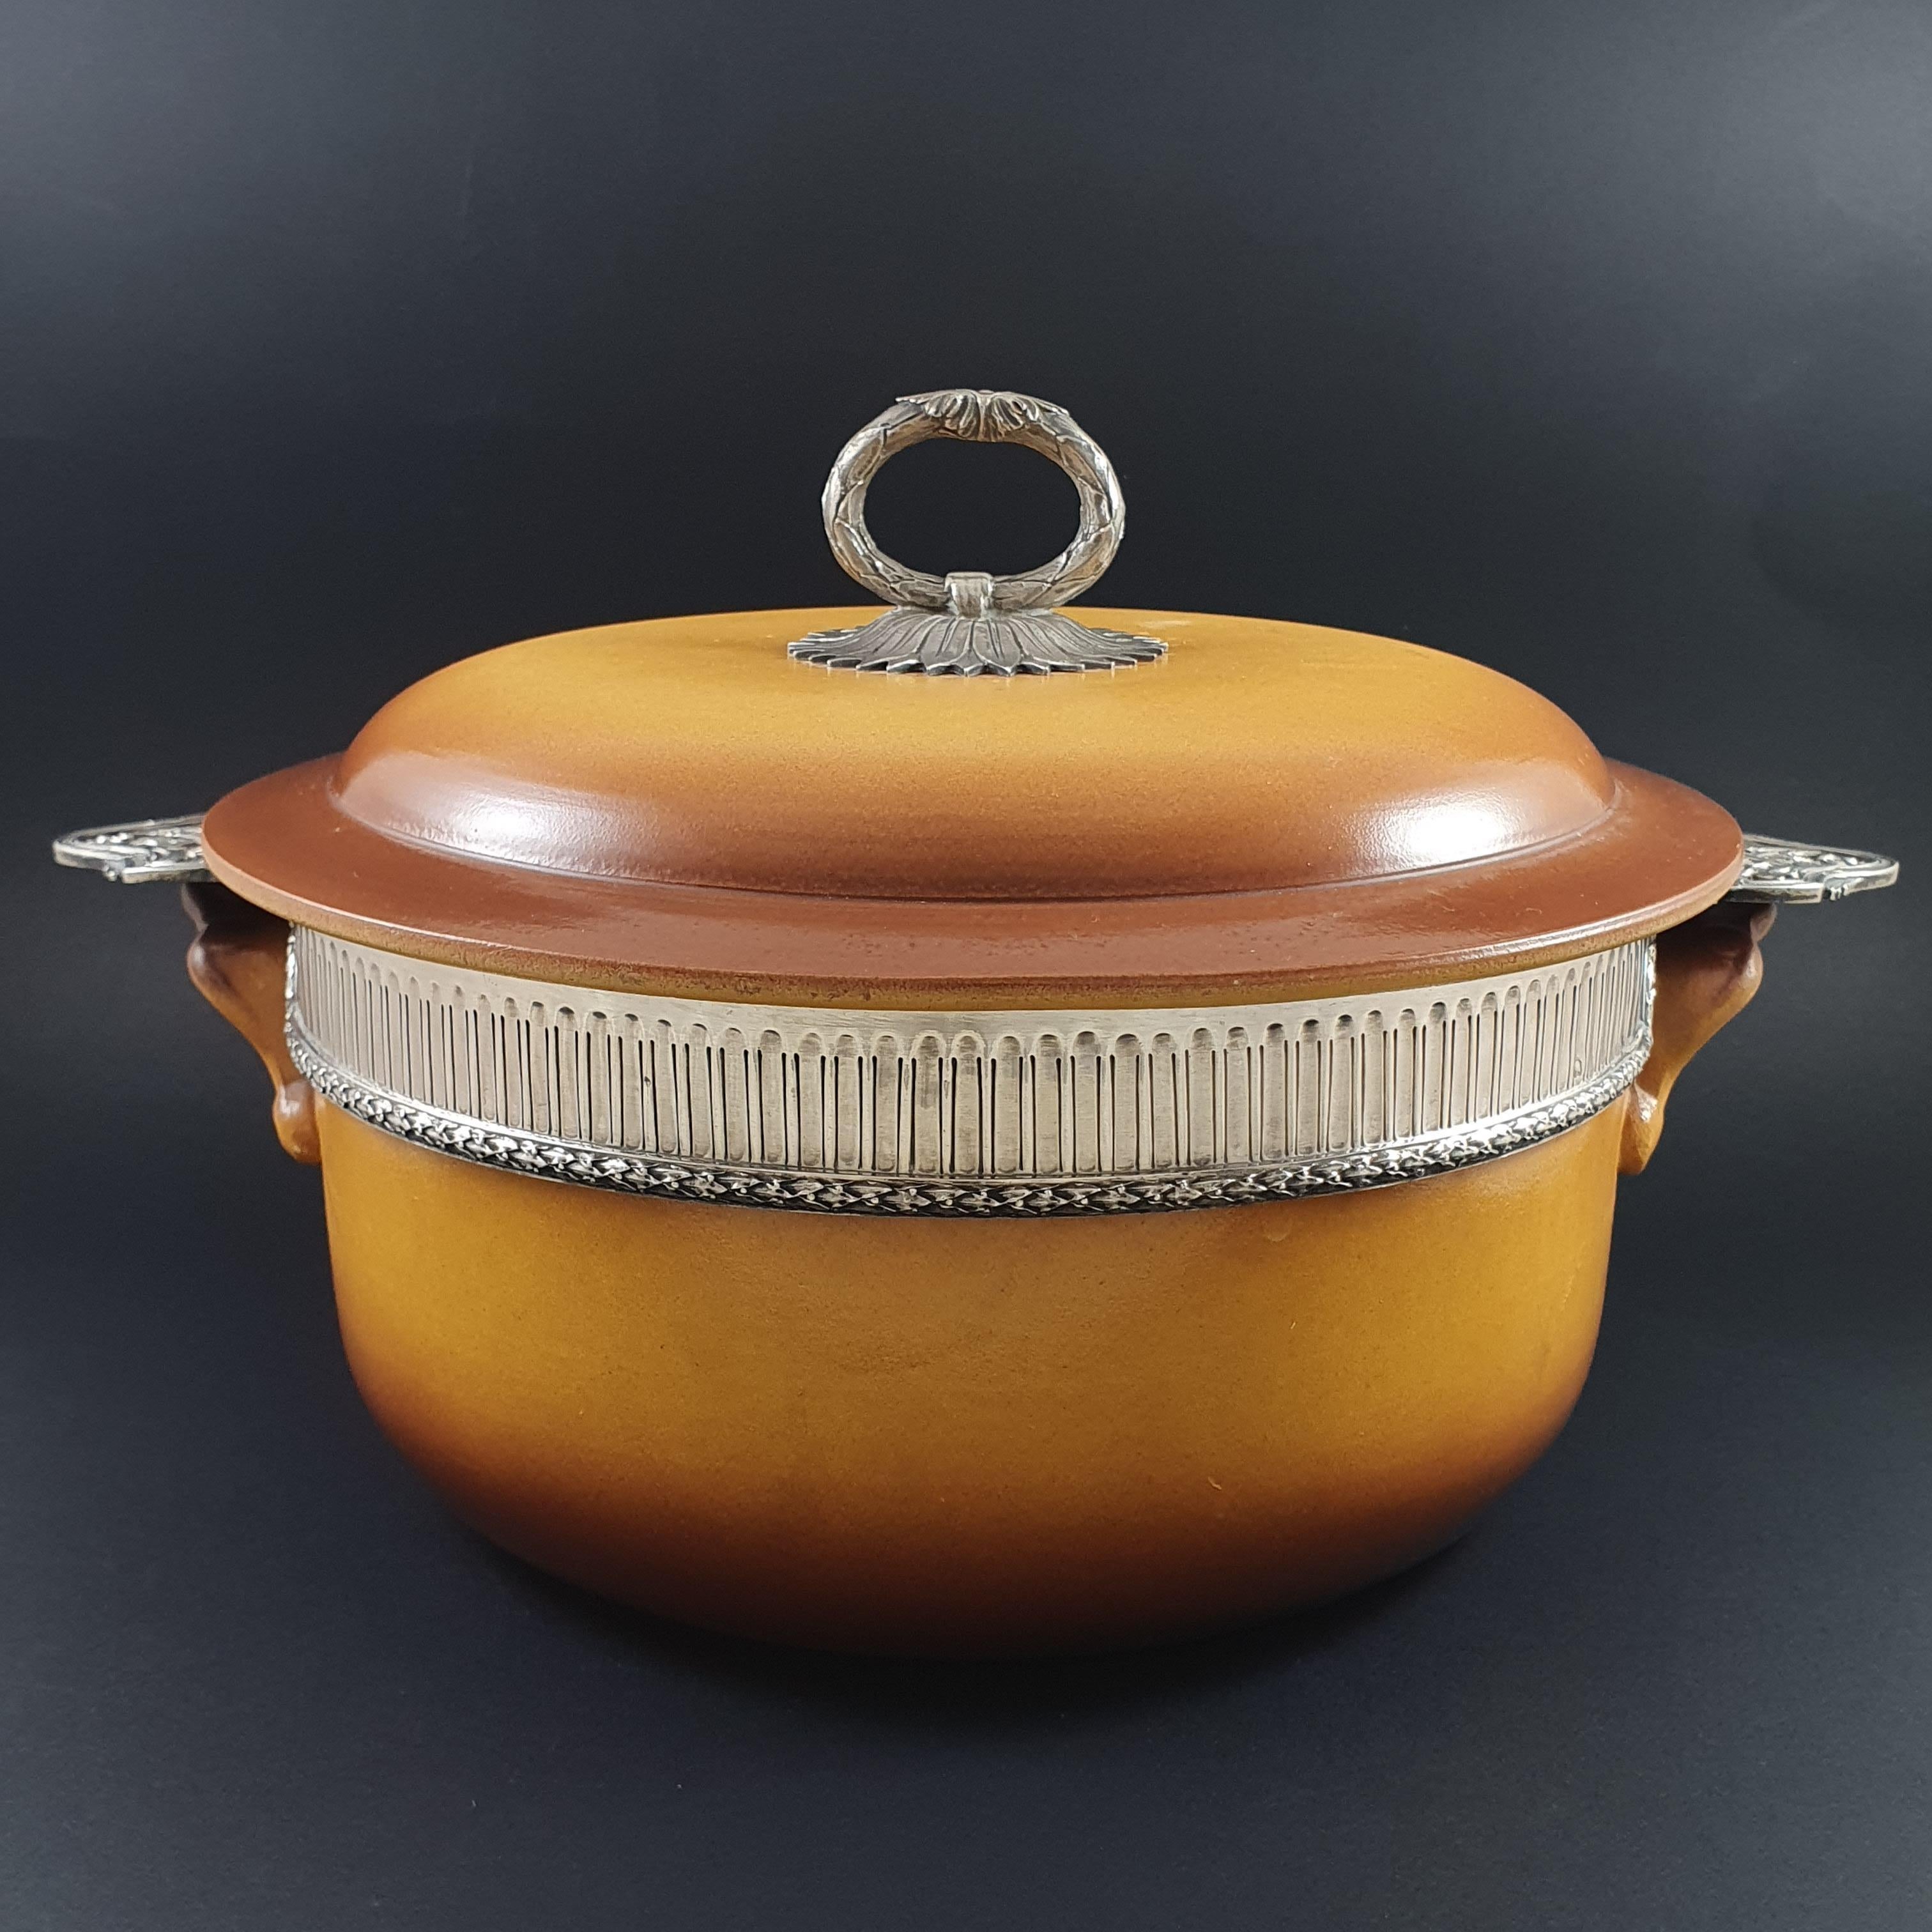 Terracotta and Sterling Silver vegetable 

Decorated with a frieze of pearls, foliage and foliage 

Hallmarked Minerva 1st title for 950/1000 purity silver

Length: 32 cm 
Diameter: 22 cm 
Height: 17 cm 

Some light chips on the edge of